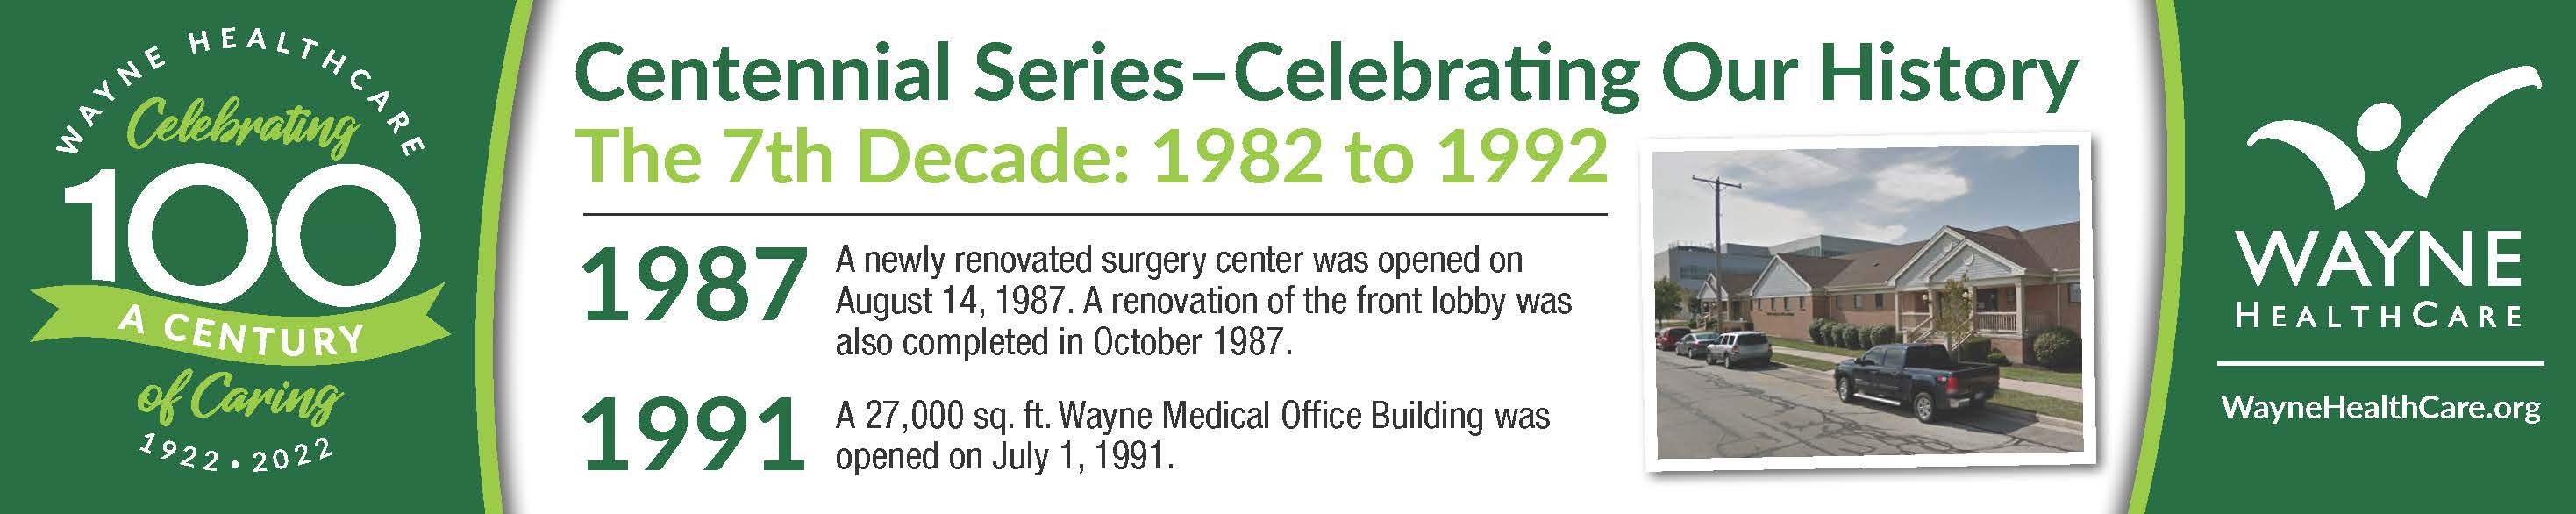 7th Decade Centennial  information about Wayne HealthCare Picture of Wayne Medical Office Building